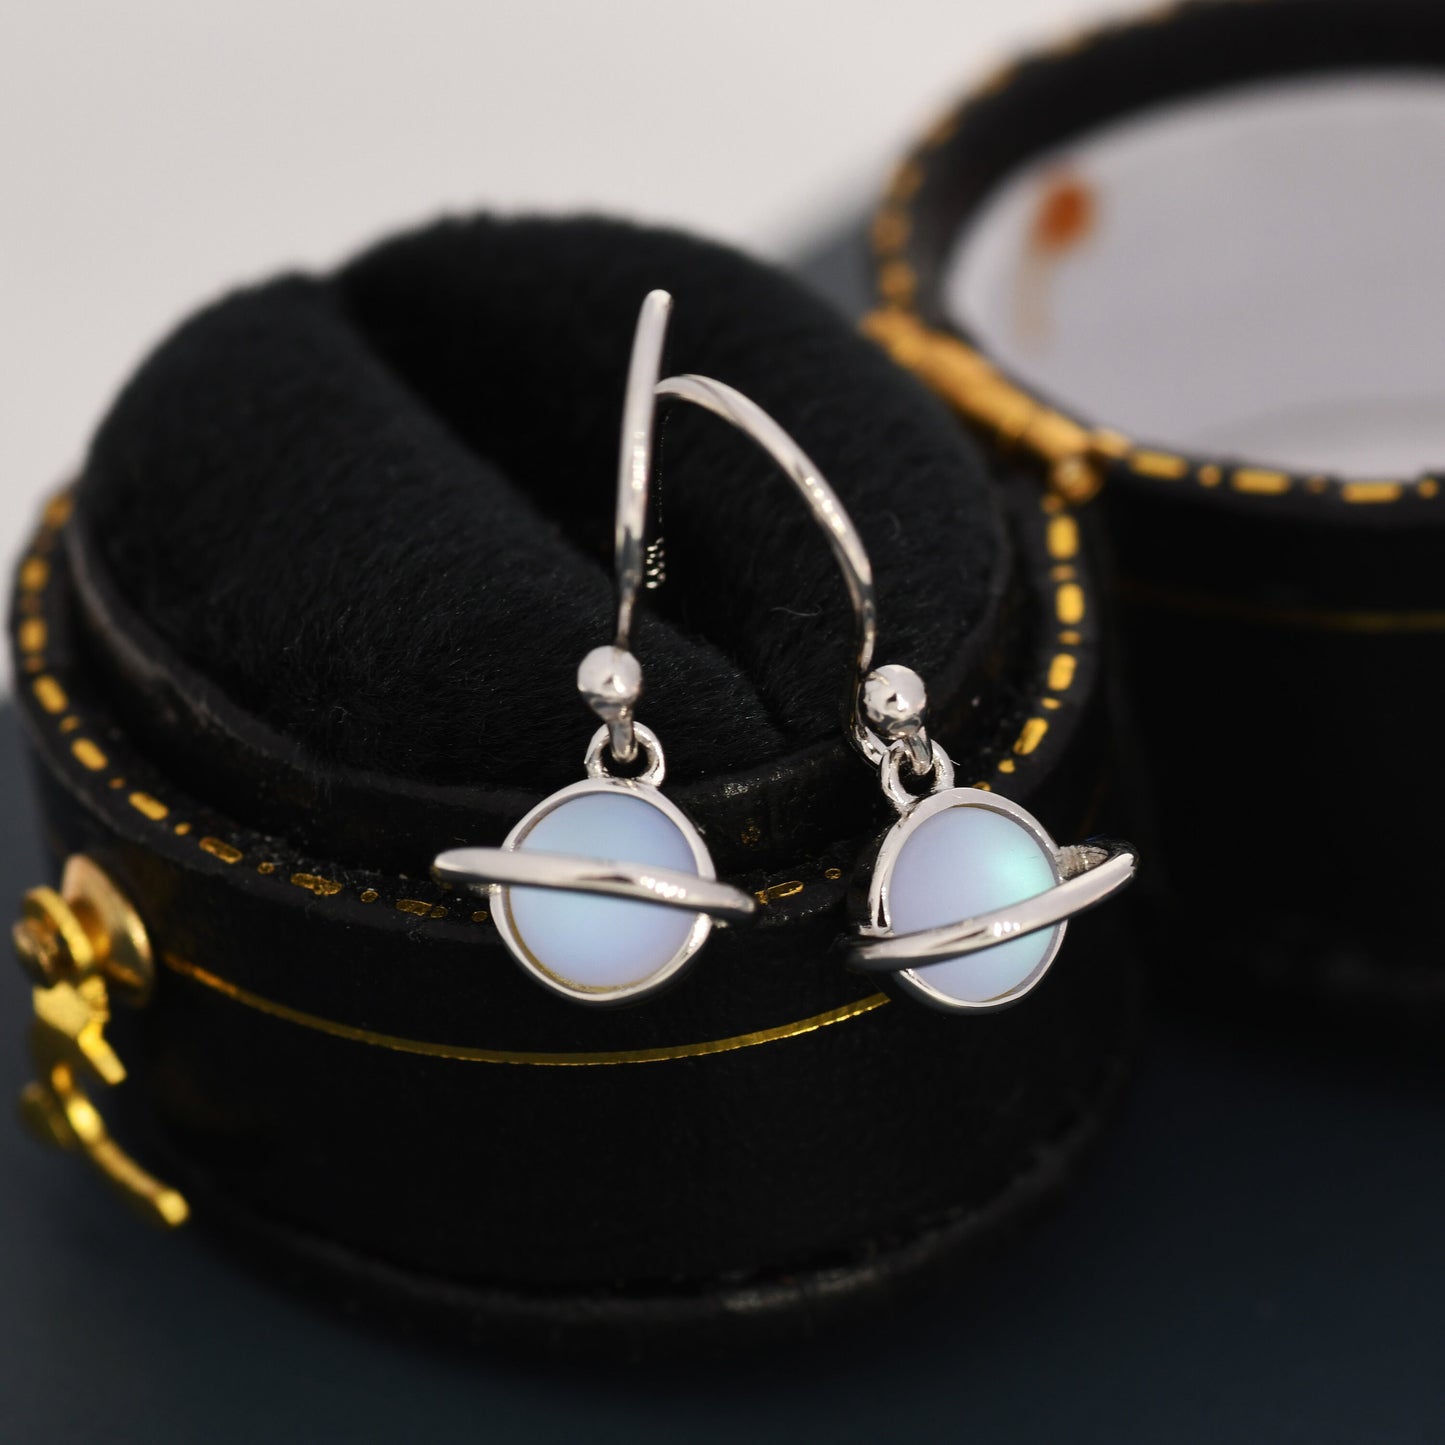 Little Planet Drop Hook Earrings in Sterling Silver - Simulated Moonstone,  Cute, Fun, Whimsical and Pretty